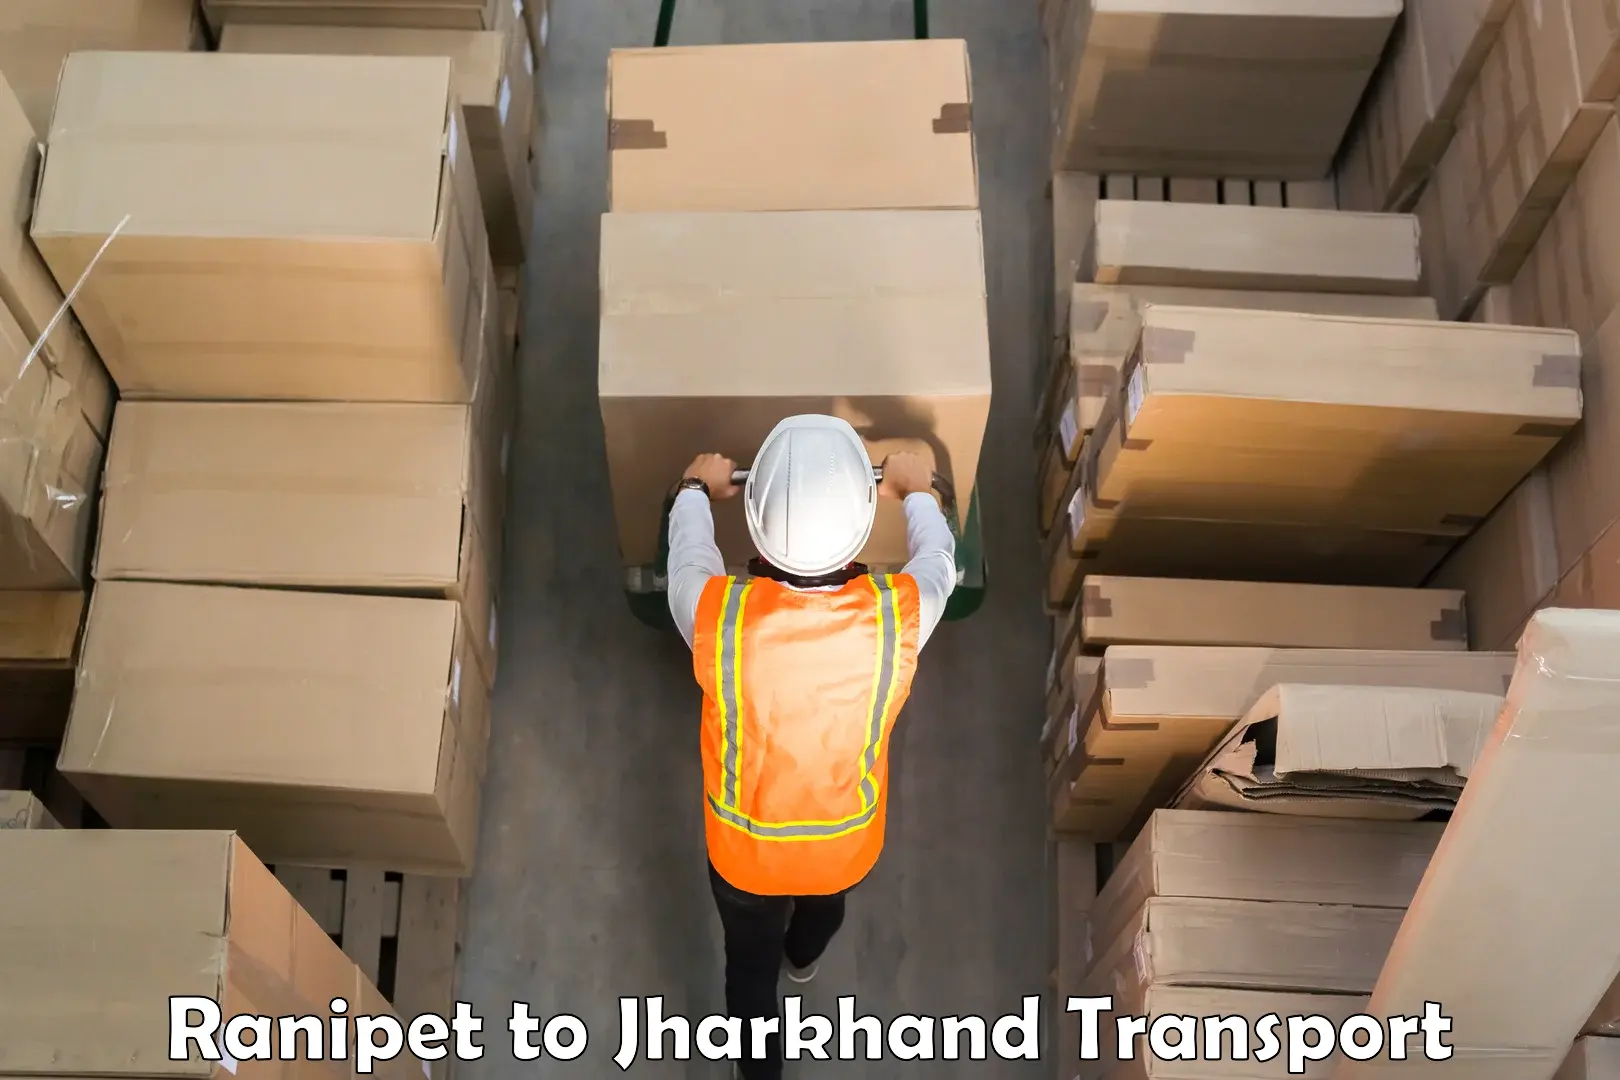 Part load transport service in India Ranipet to Ghatshila